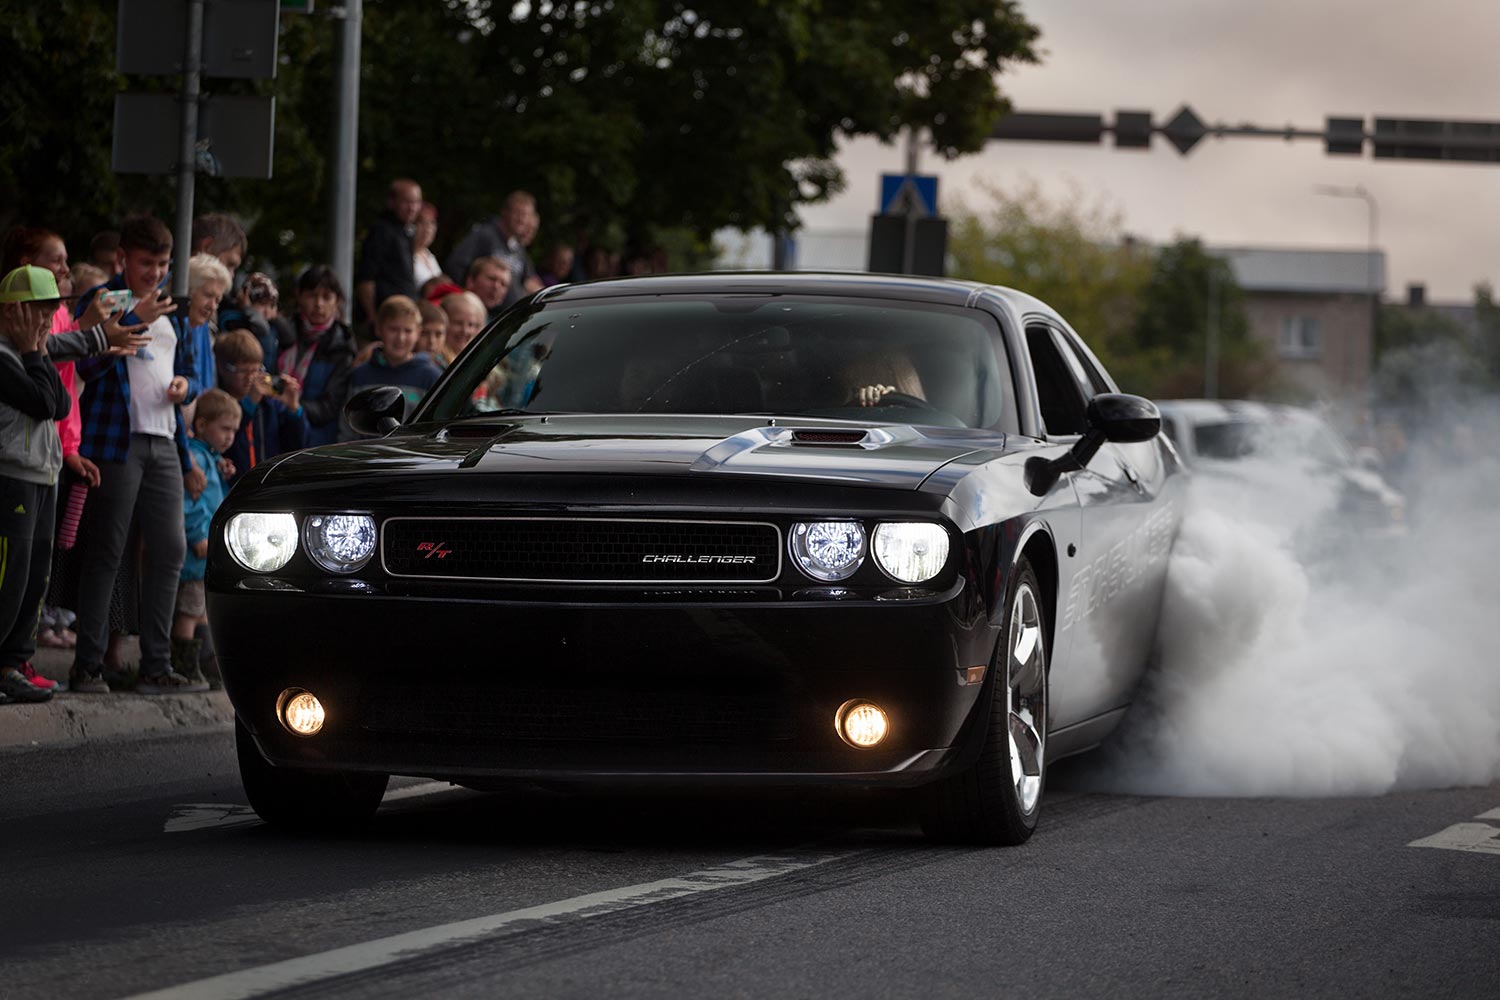 Dodge Challenger RT HEMI V8 burn out and drift during American car show